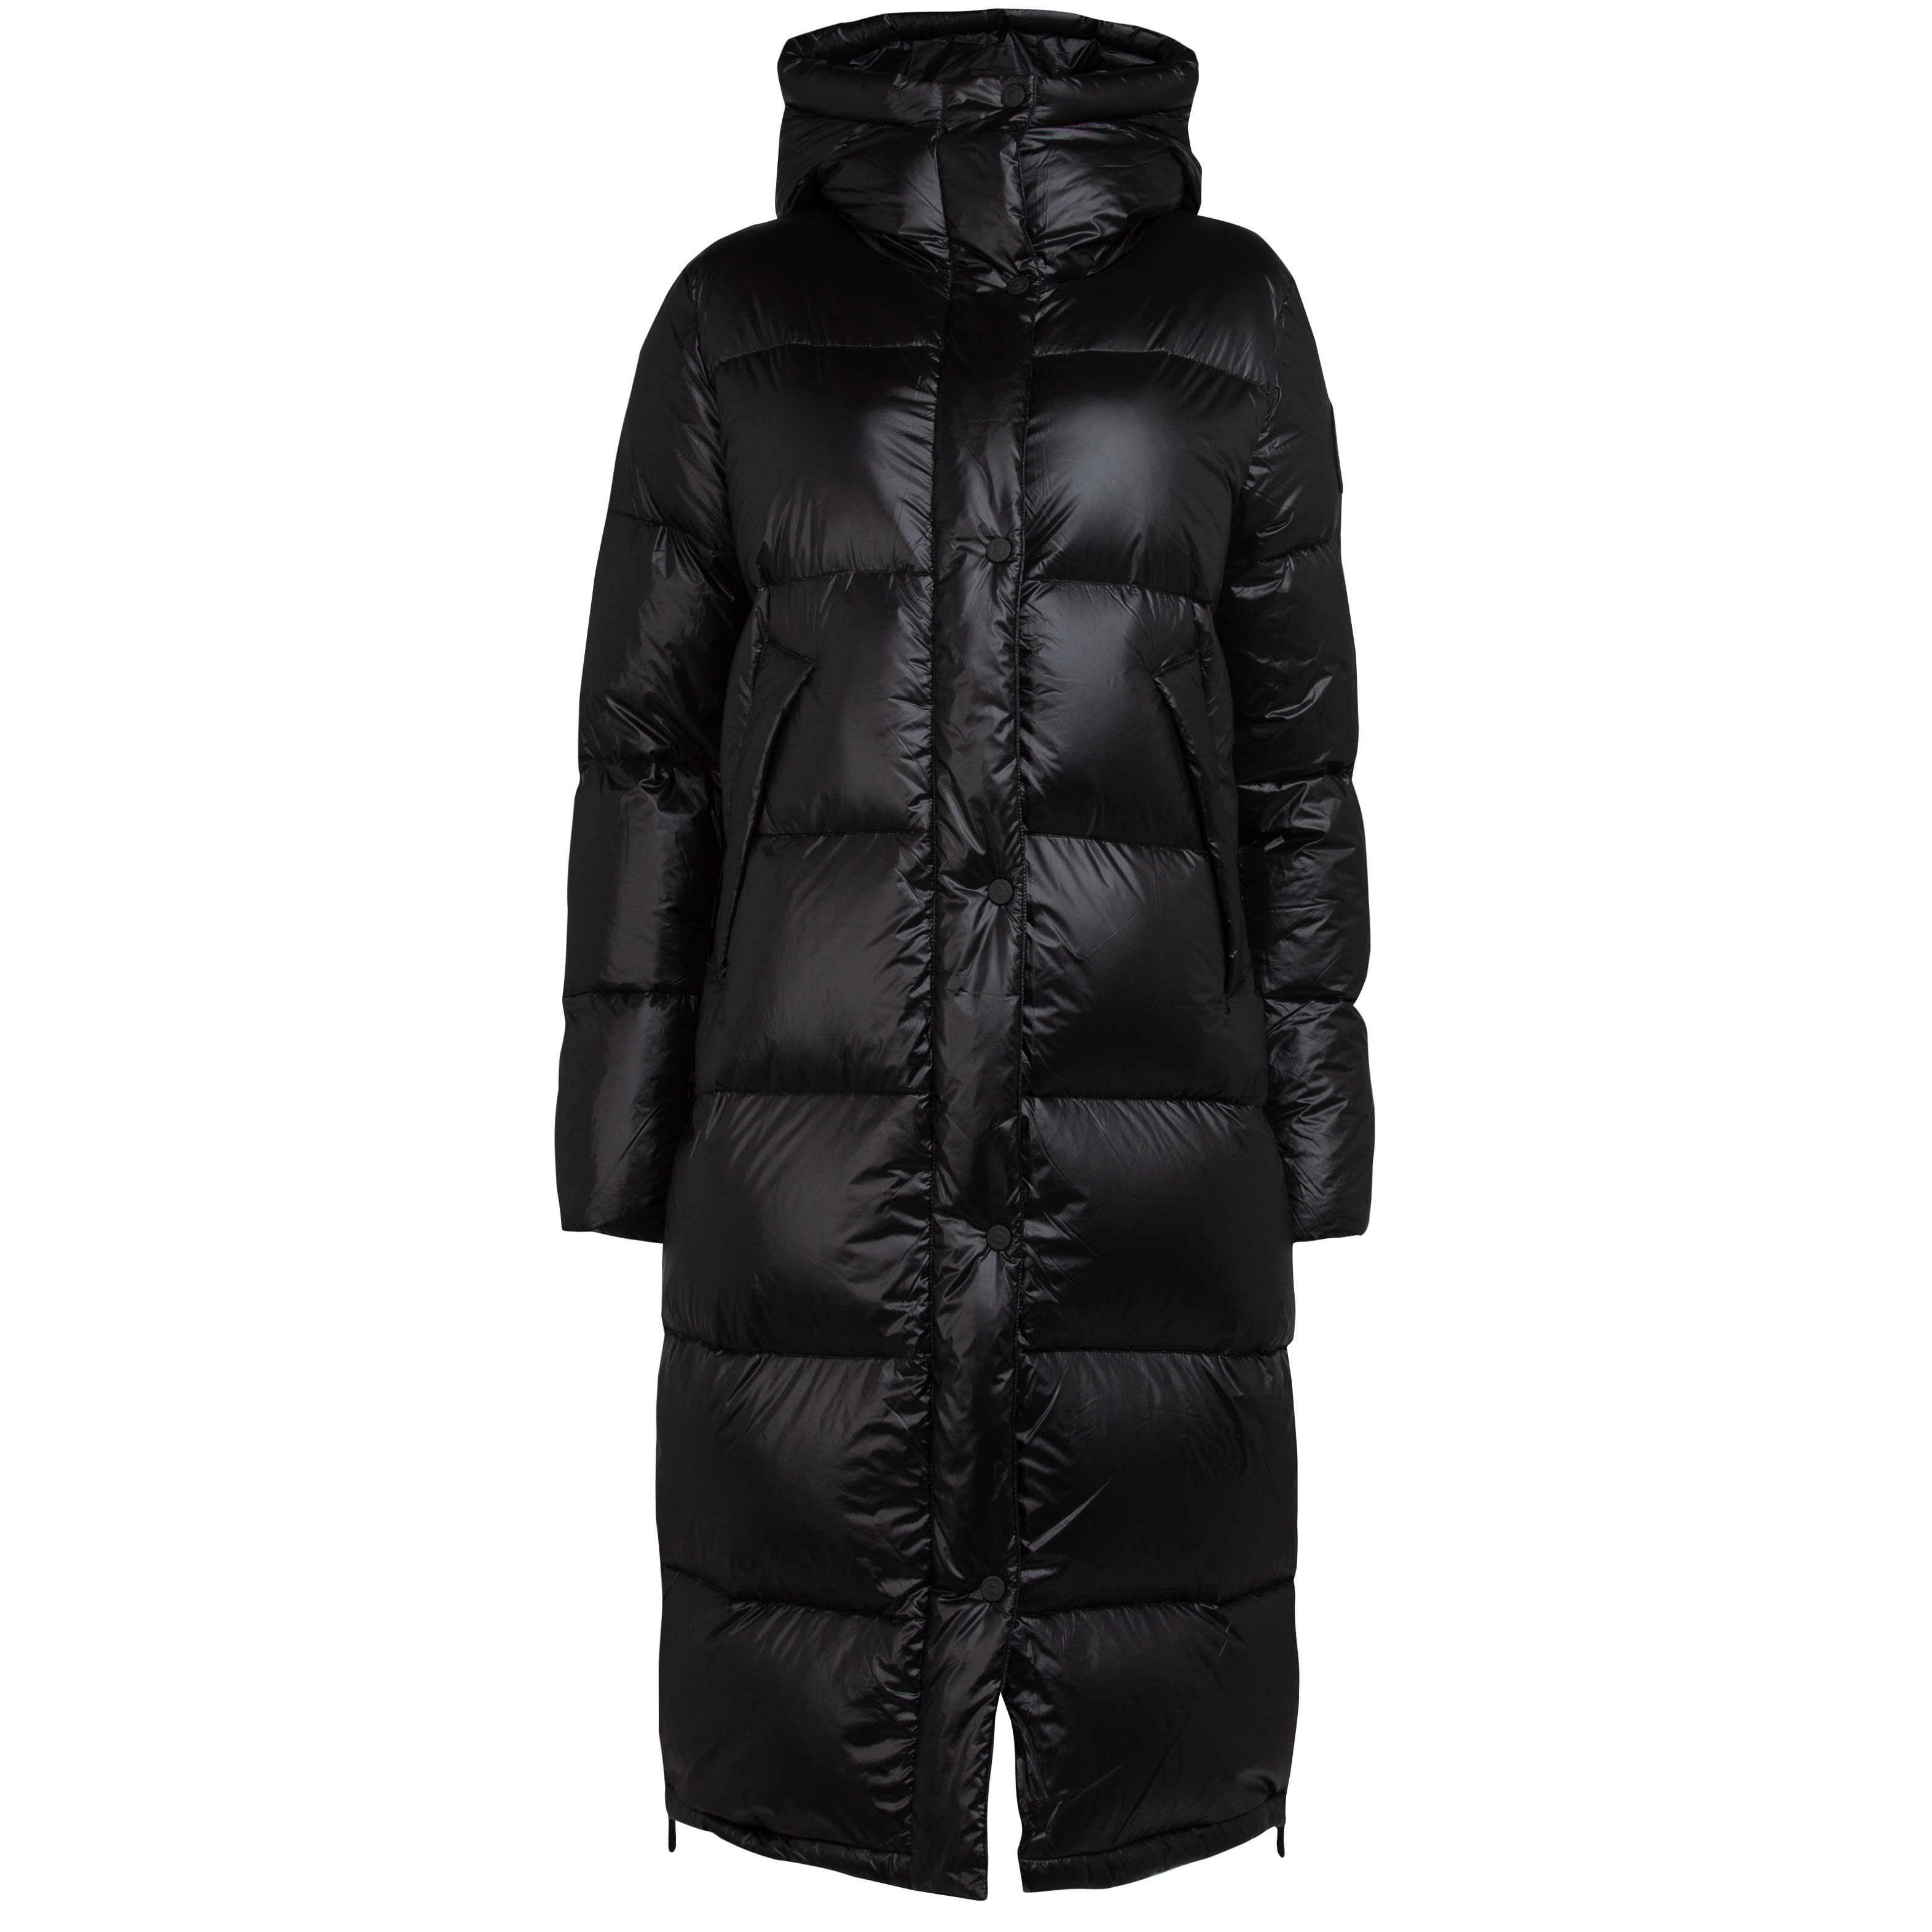 Watchful Fortolke blåhval Buy 8848 Altitude Women's Ariella Coat from Outnorth